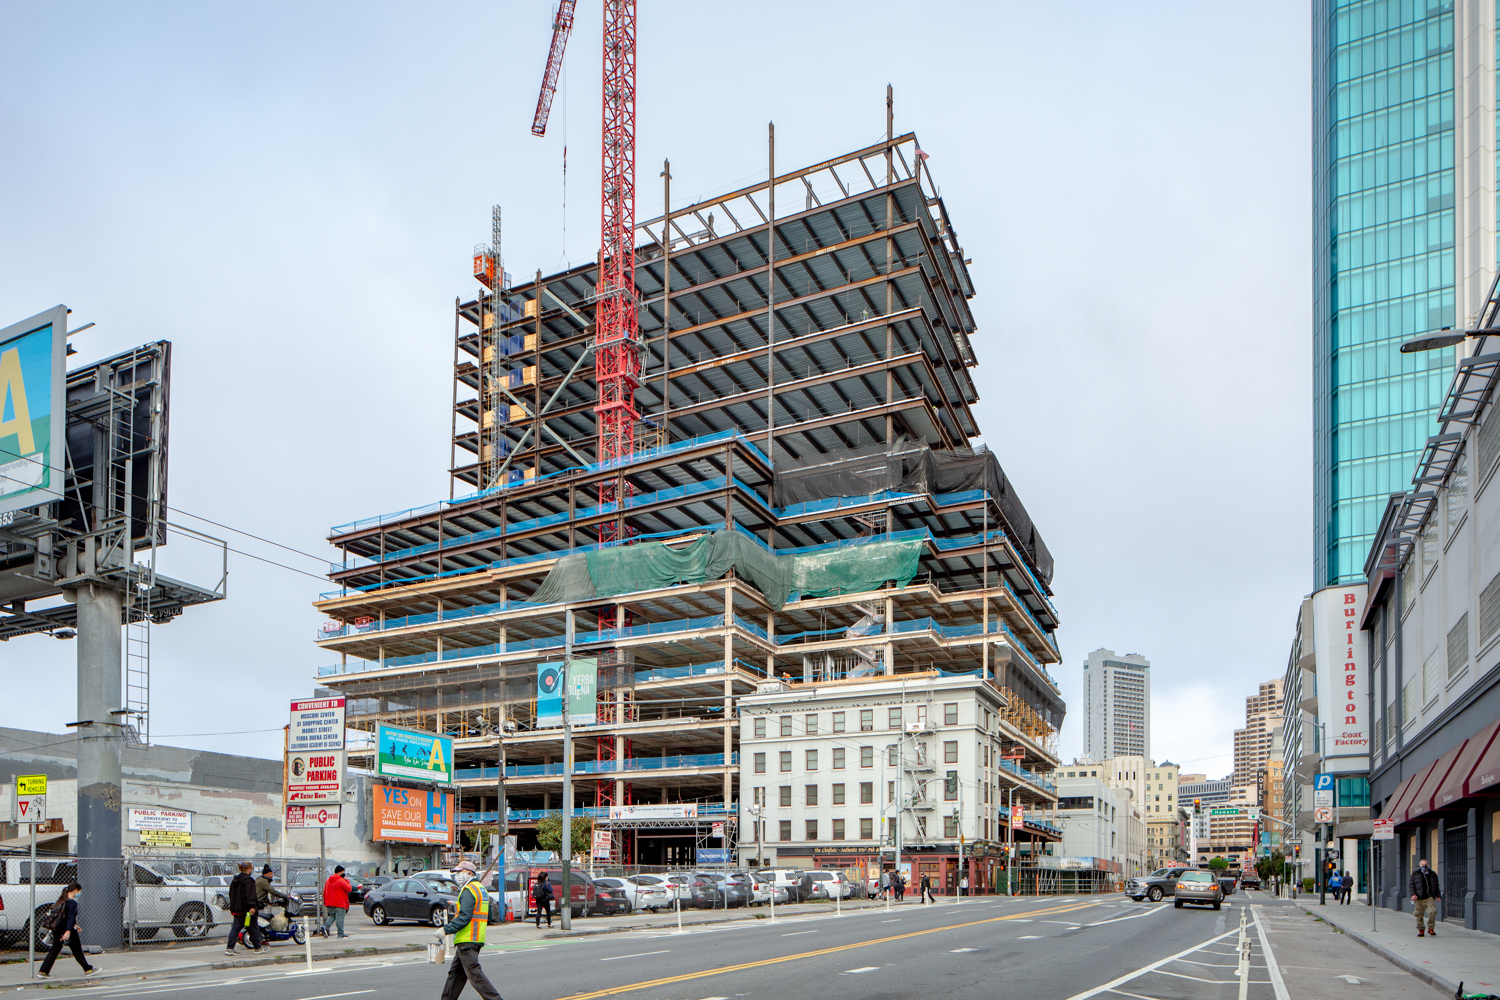 415 Natoma Street with the Dempster at the project corner, image by Andrew Campbell Nelson